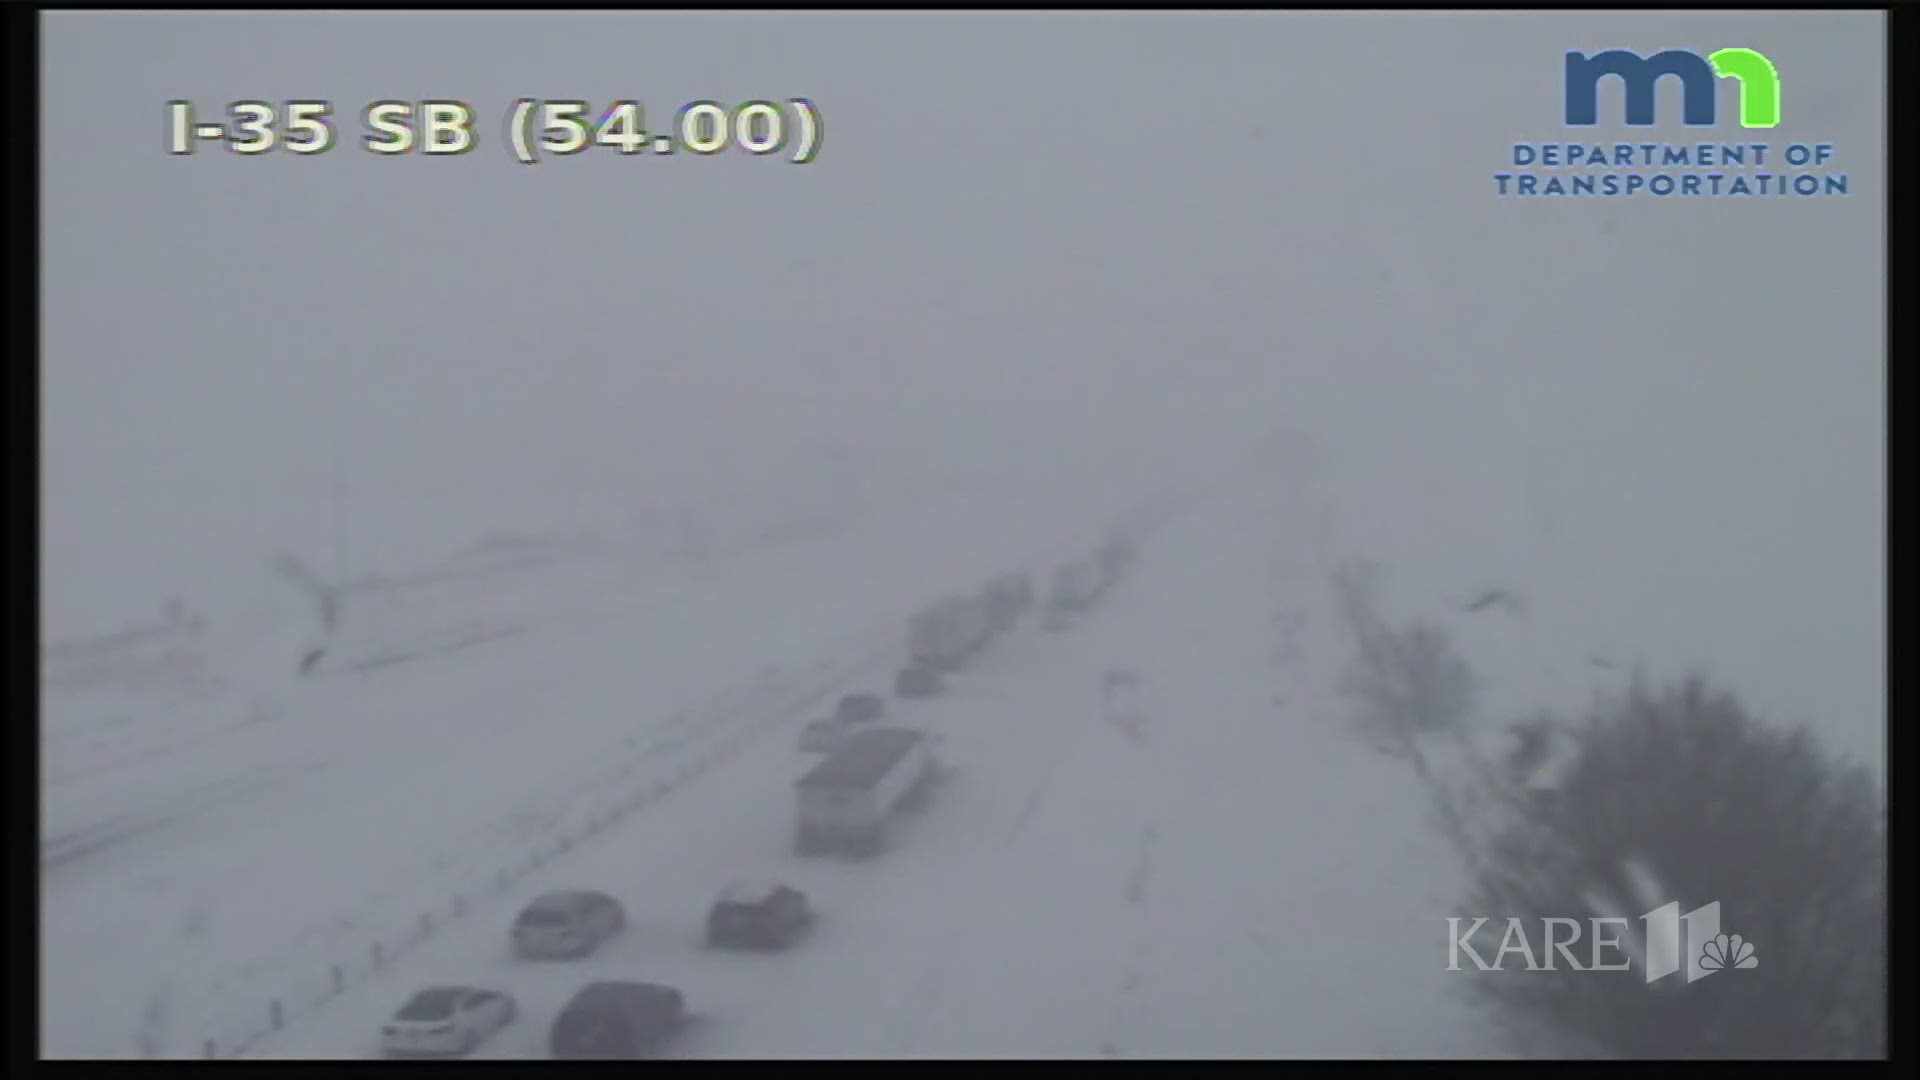 Traffic slowed to a standstill on I-35 between Medford and Faribault Wednesday due to crashes caused by heavy snow. (Video: MnDOT Traffic Cam)